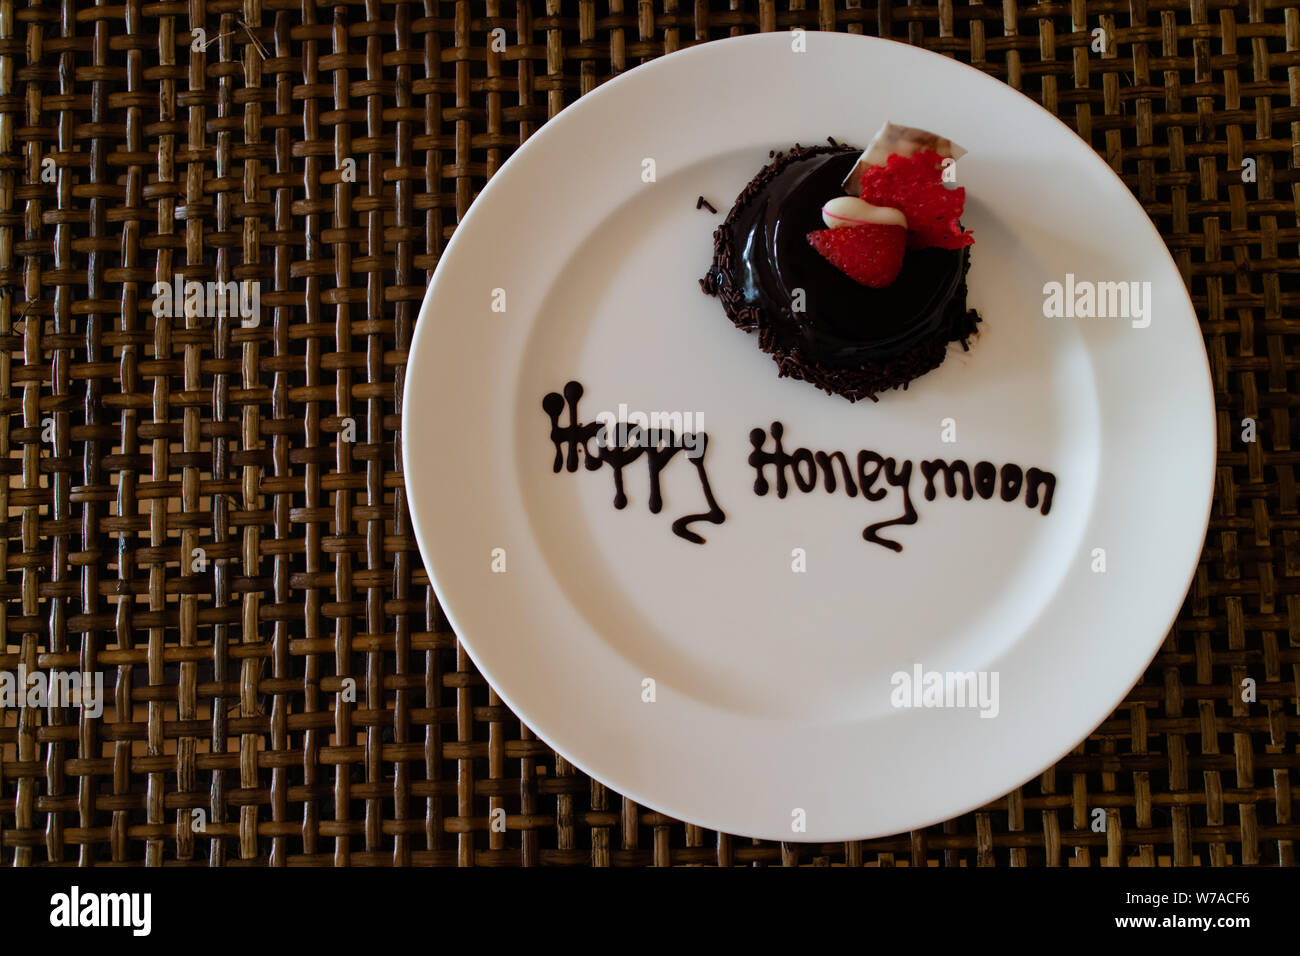 Our Happy Honeymoon Cake in Thailand - Our Big Fat Travel Adventure